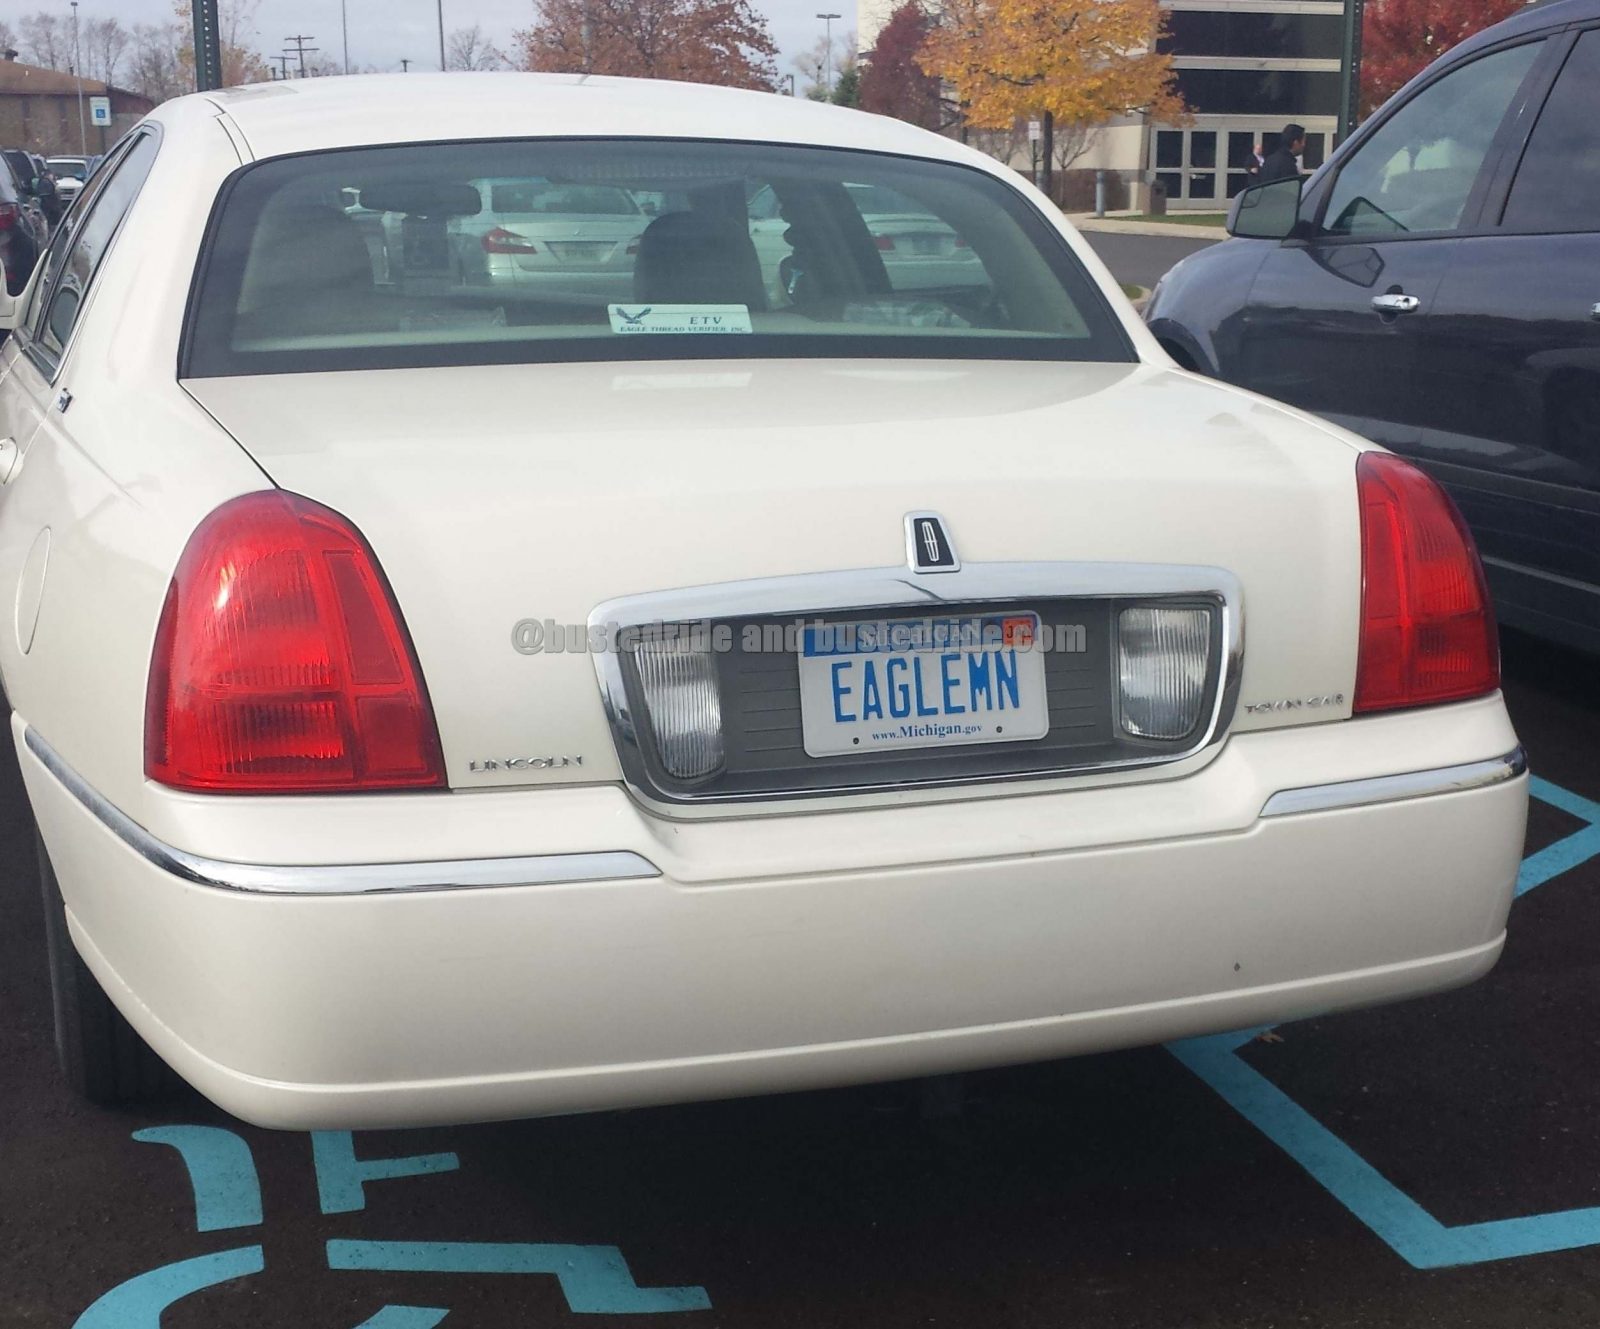 EAGLEMN - Vanity License Plate by Busted Ride